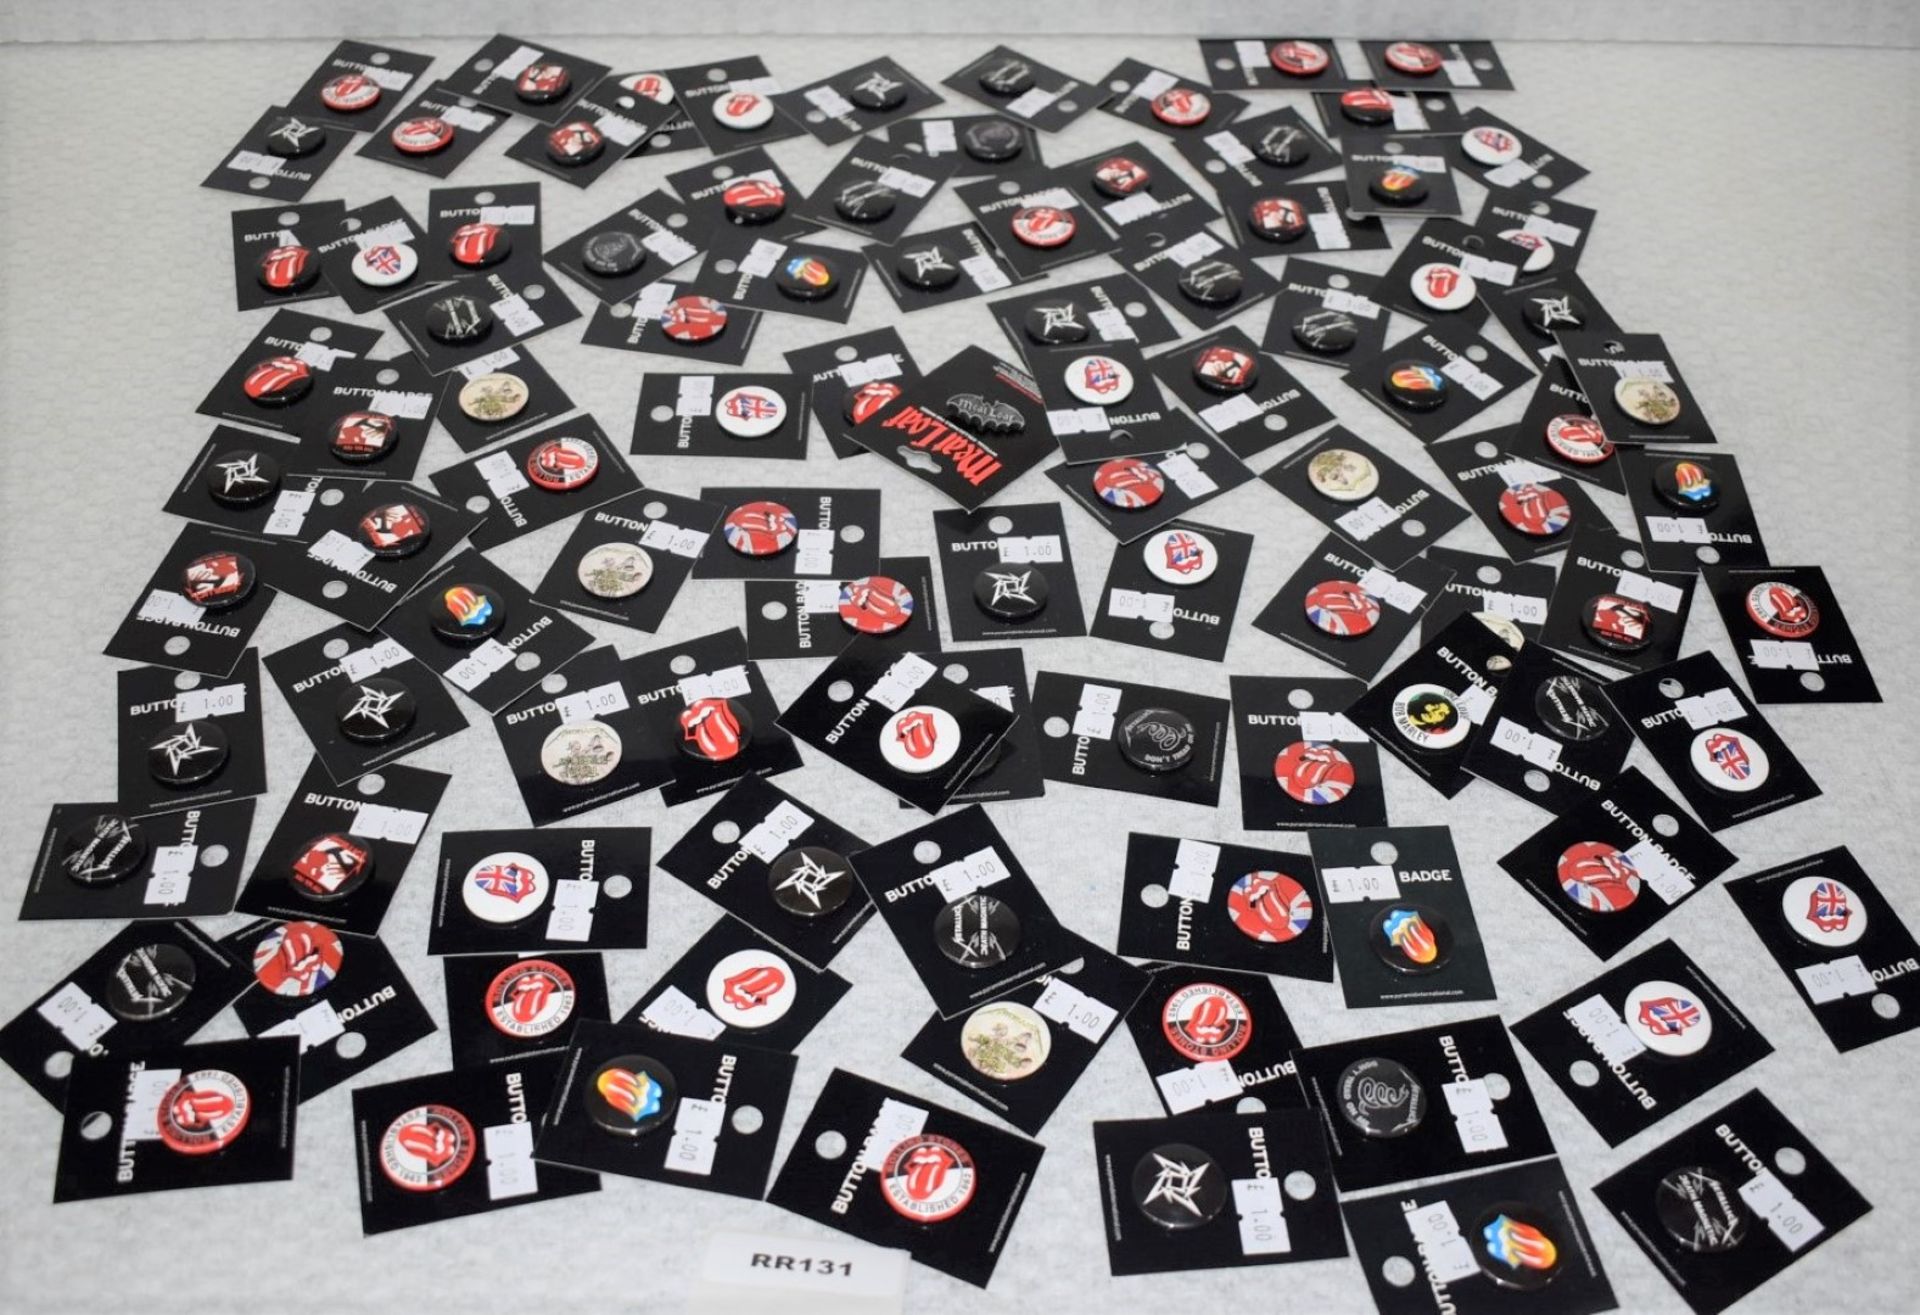 Approx 100 x Rock n Roll Button Badges By Pyramid - Various Bands Included - Officially Licensed - Image 2 of 6